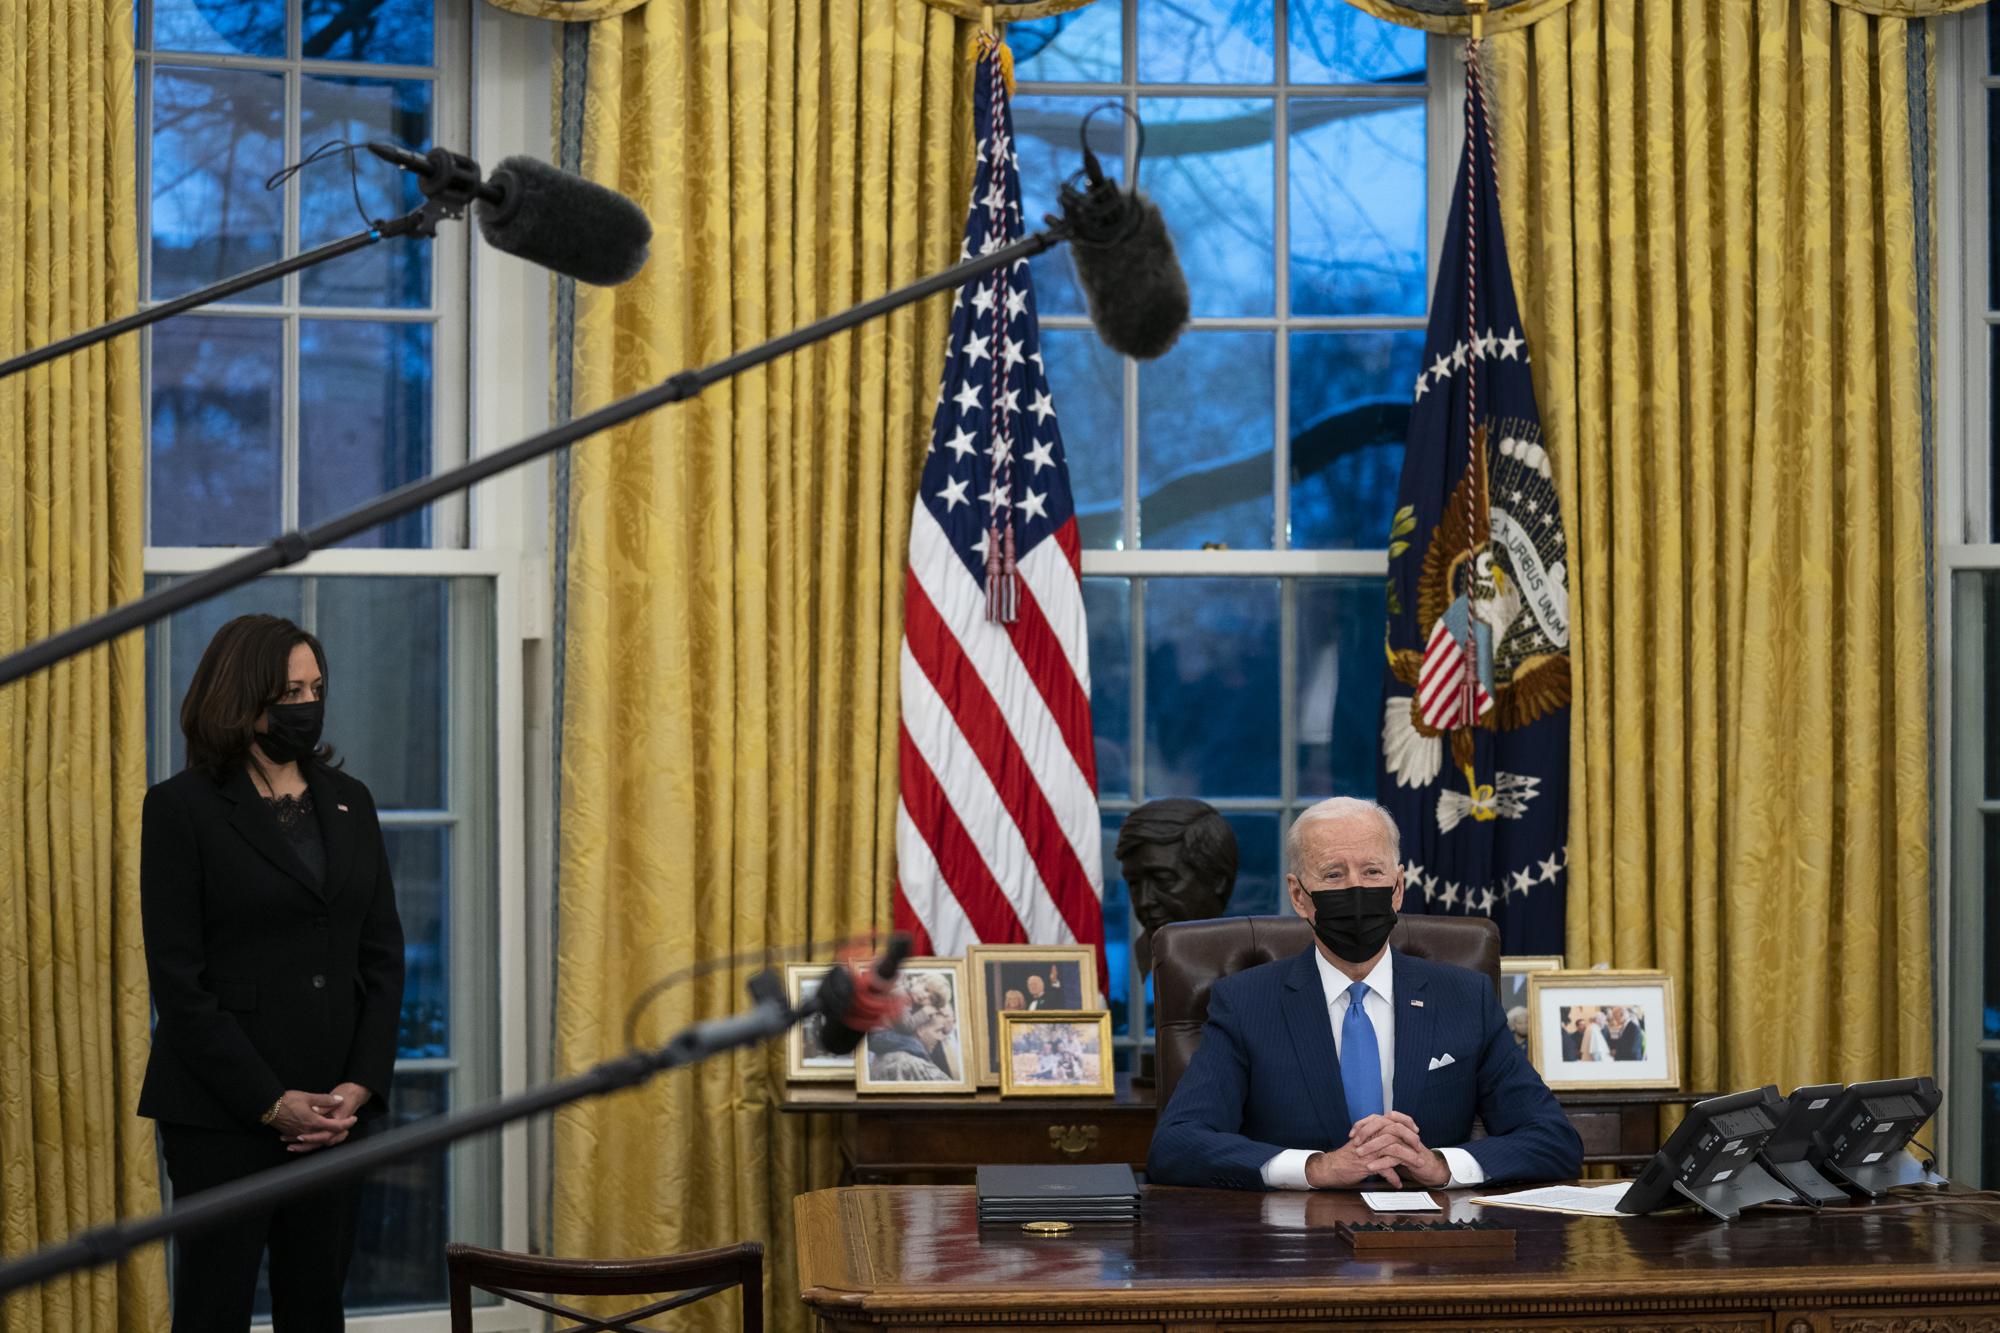 FILE - Vice President Kamala Harris, left, listens as President Joe Biden delivers remarks on immigration, in the Oval Office of the White House in Washington on Feb. 2, 2021. Biden took office on Jan. 20 and almost immediately, numbers of migrants exceeded expectations. (AP Photo/Evan Vucci, File)